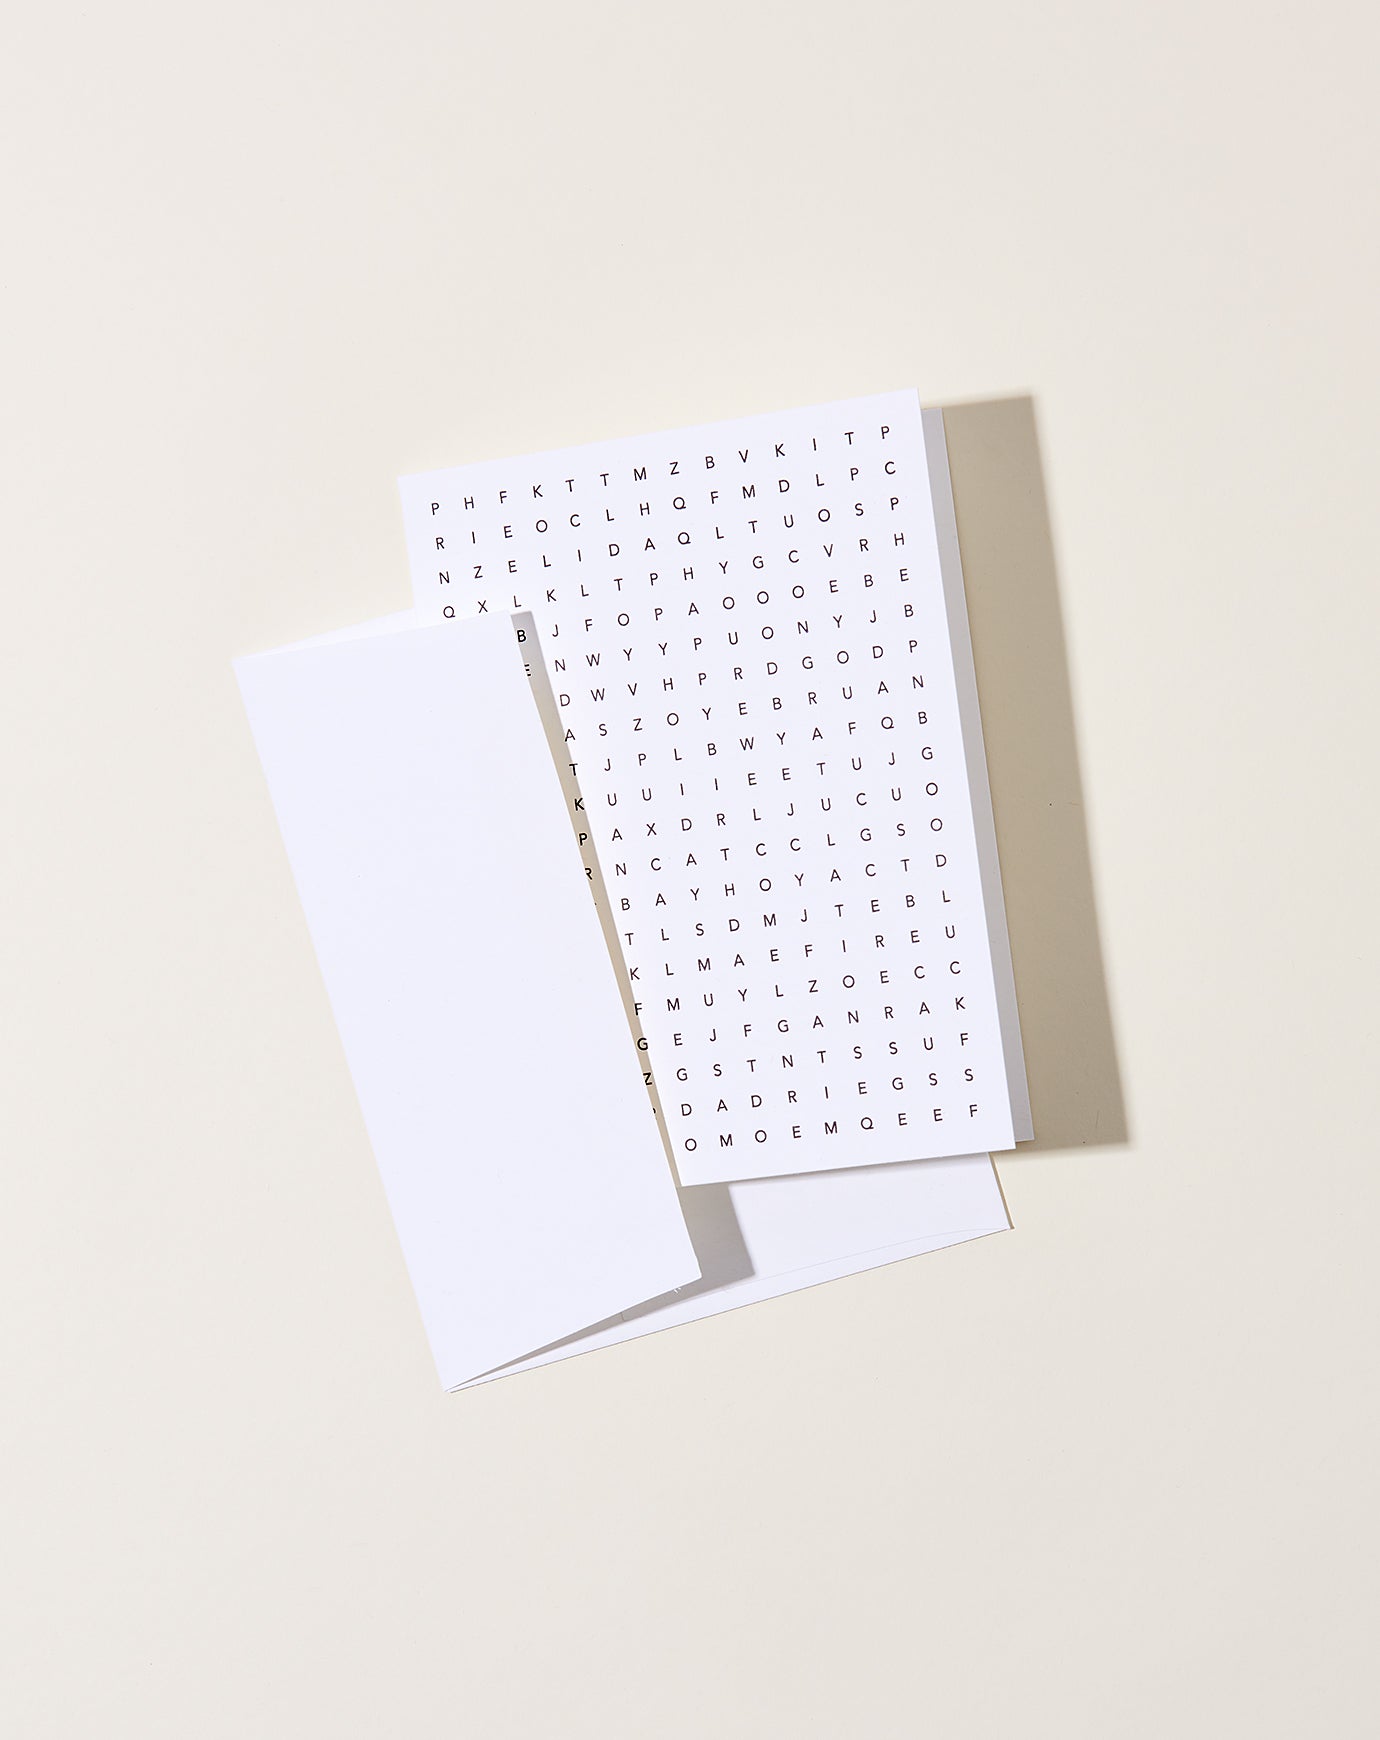 Set Editions Word Search Card